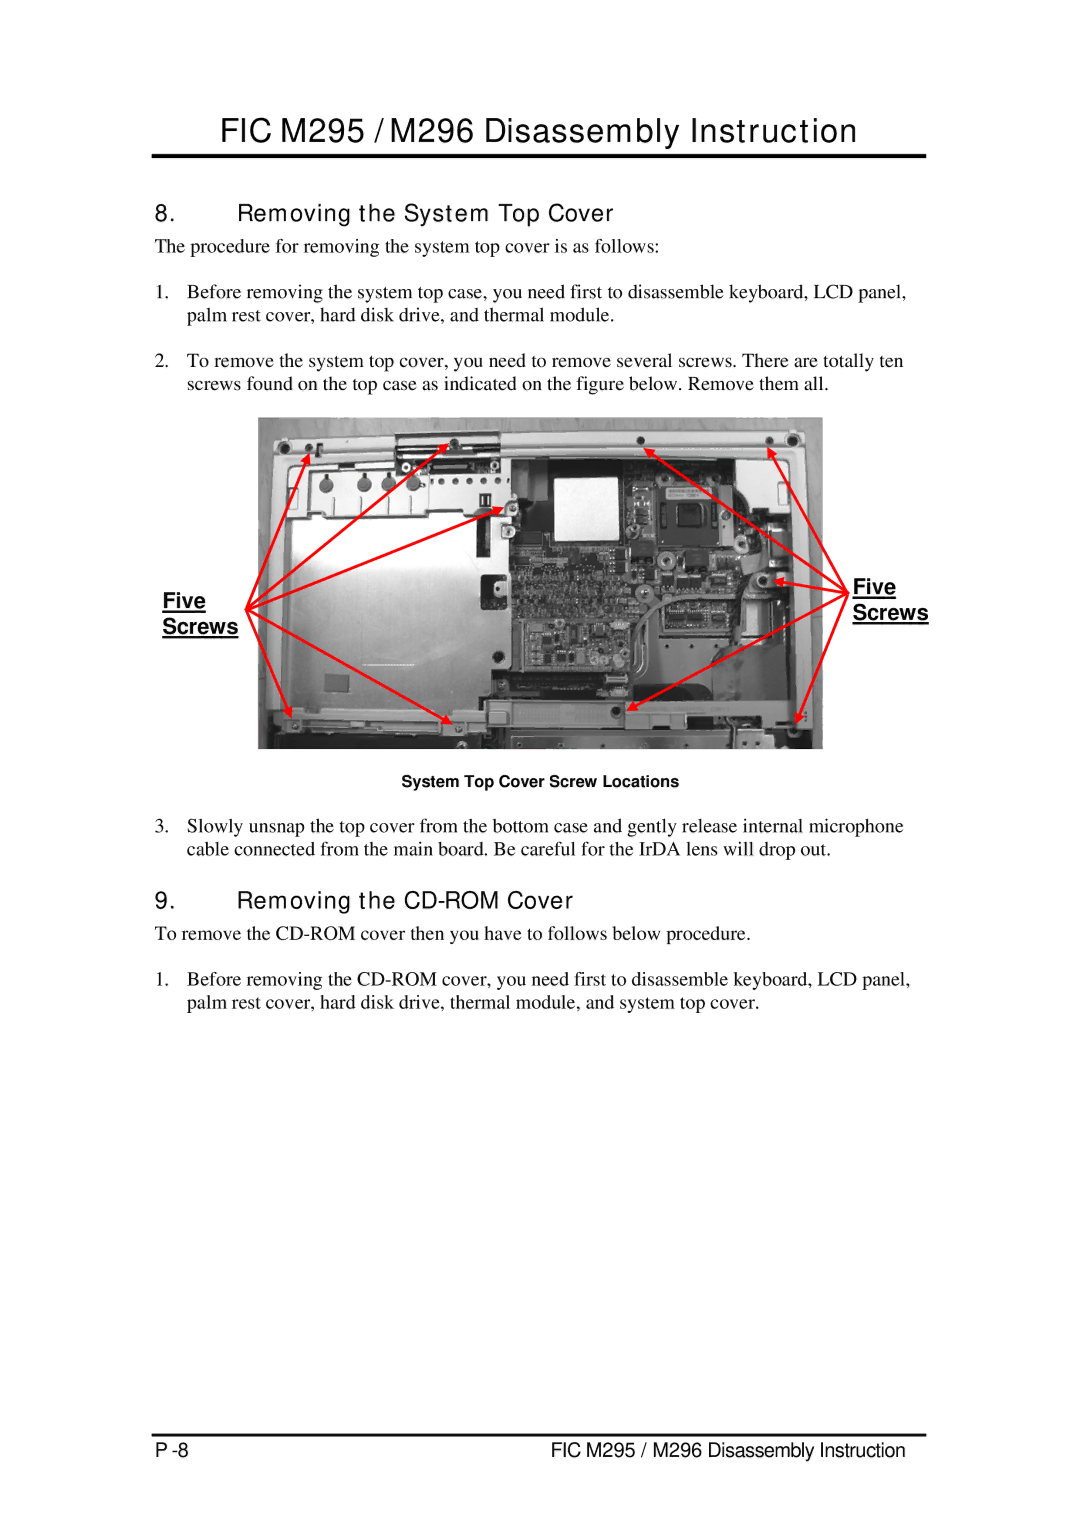 FIC M295, M296 service manual Removing the System Top Cover, Removing the CD-ROM Cover, System Top Cover Screw Locations 